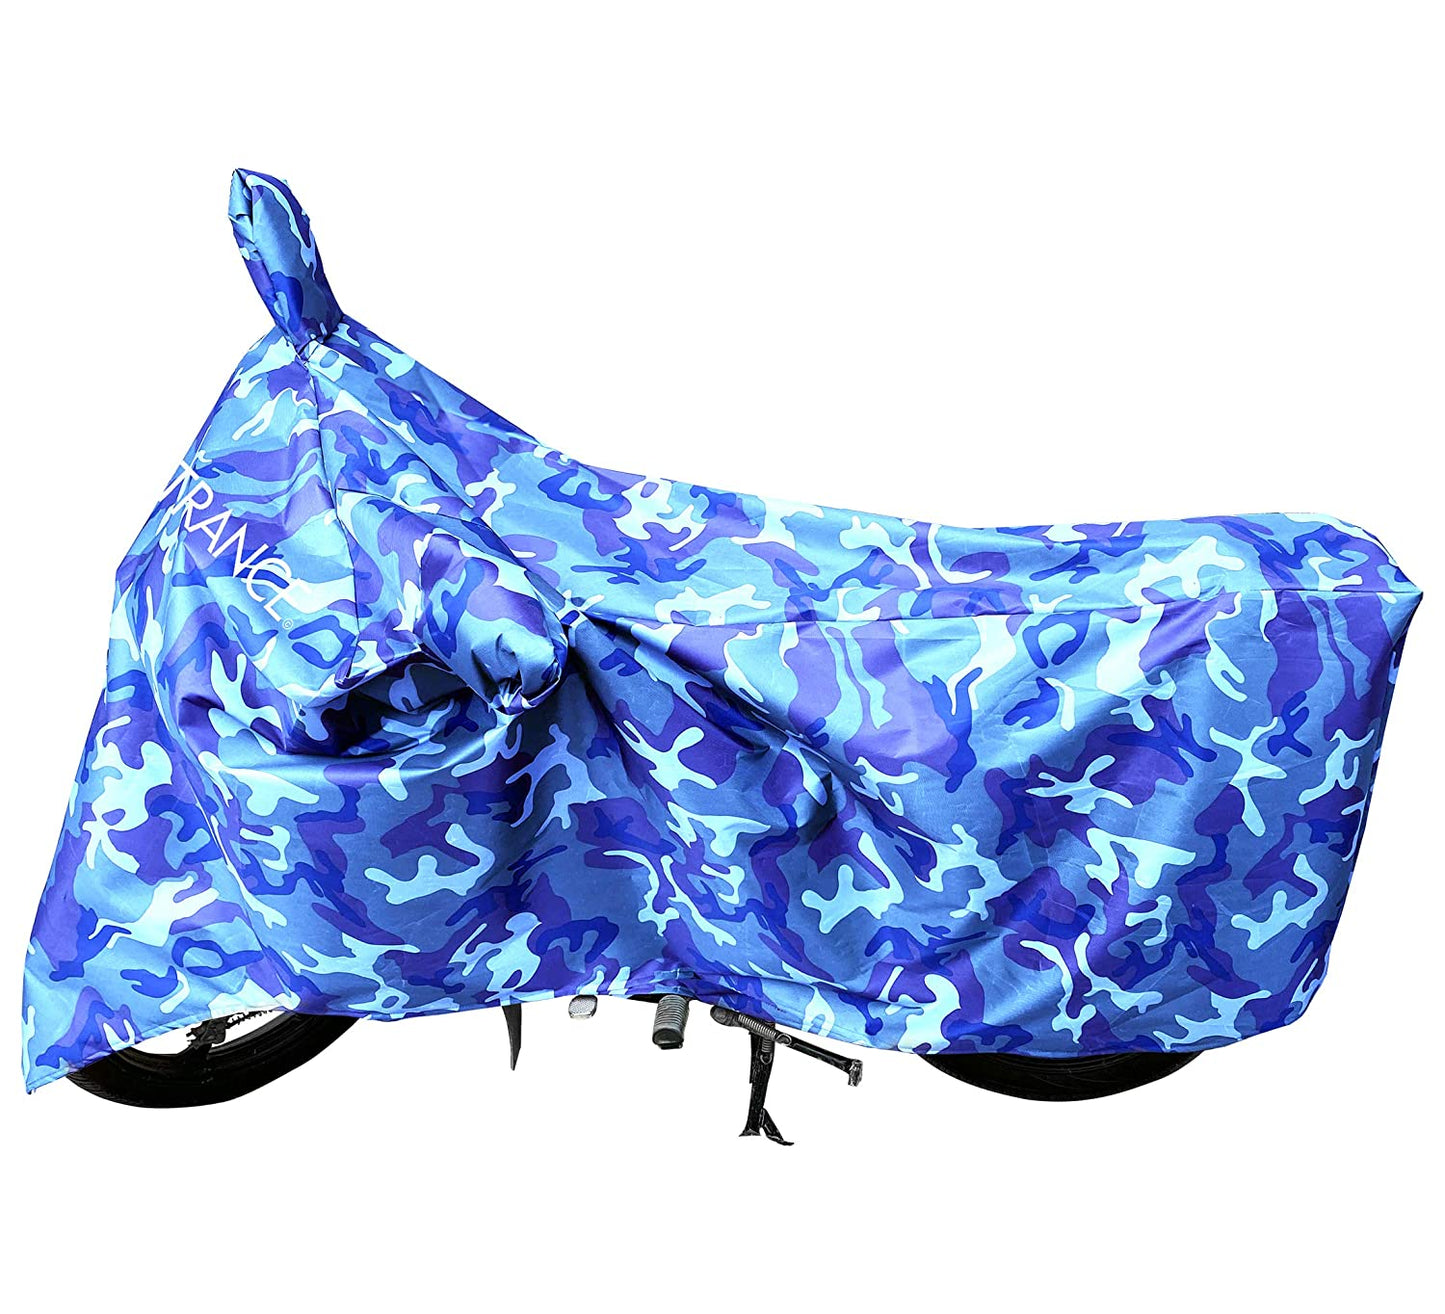 MotoTrance Jungle Bike Body Covers For Bajaj Discover 150S - Interlock-Stitched Waterproof and Heat Resistant with Mirror Pockets